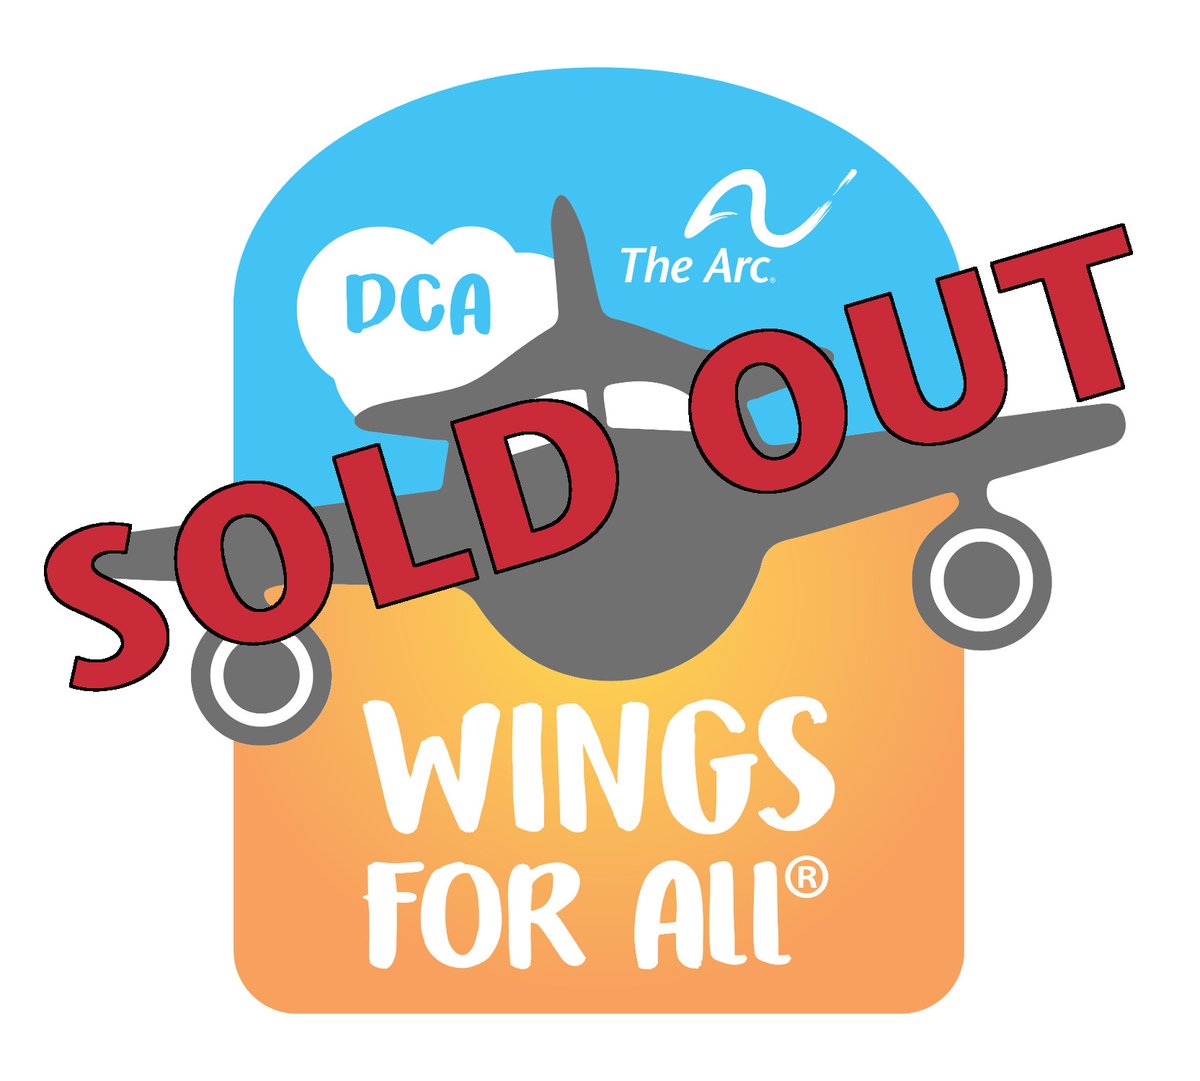 Well that didn't take long! Our Wings for All practice flights have 'sold out' in just a few hours! But we'll keep a waitlist and fill any slots that open up from cancellations. Learn more, join the waitlist, or sign up to volunteer here: ow.ly/Kse350PL2Vv